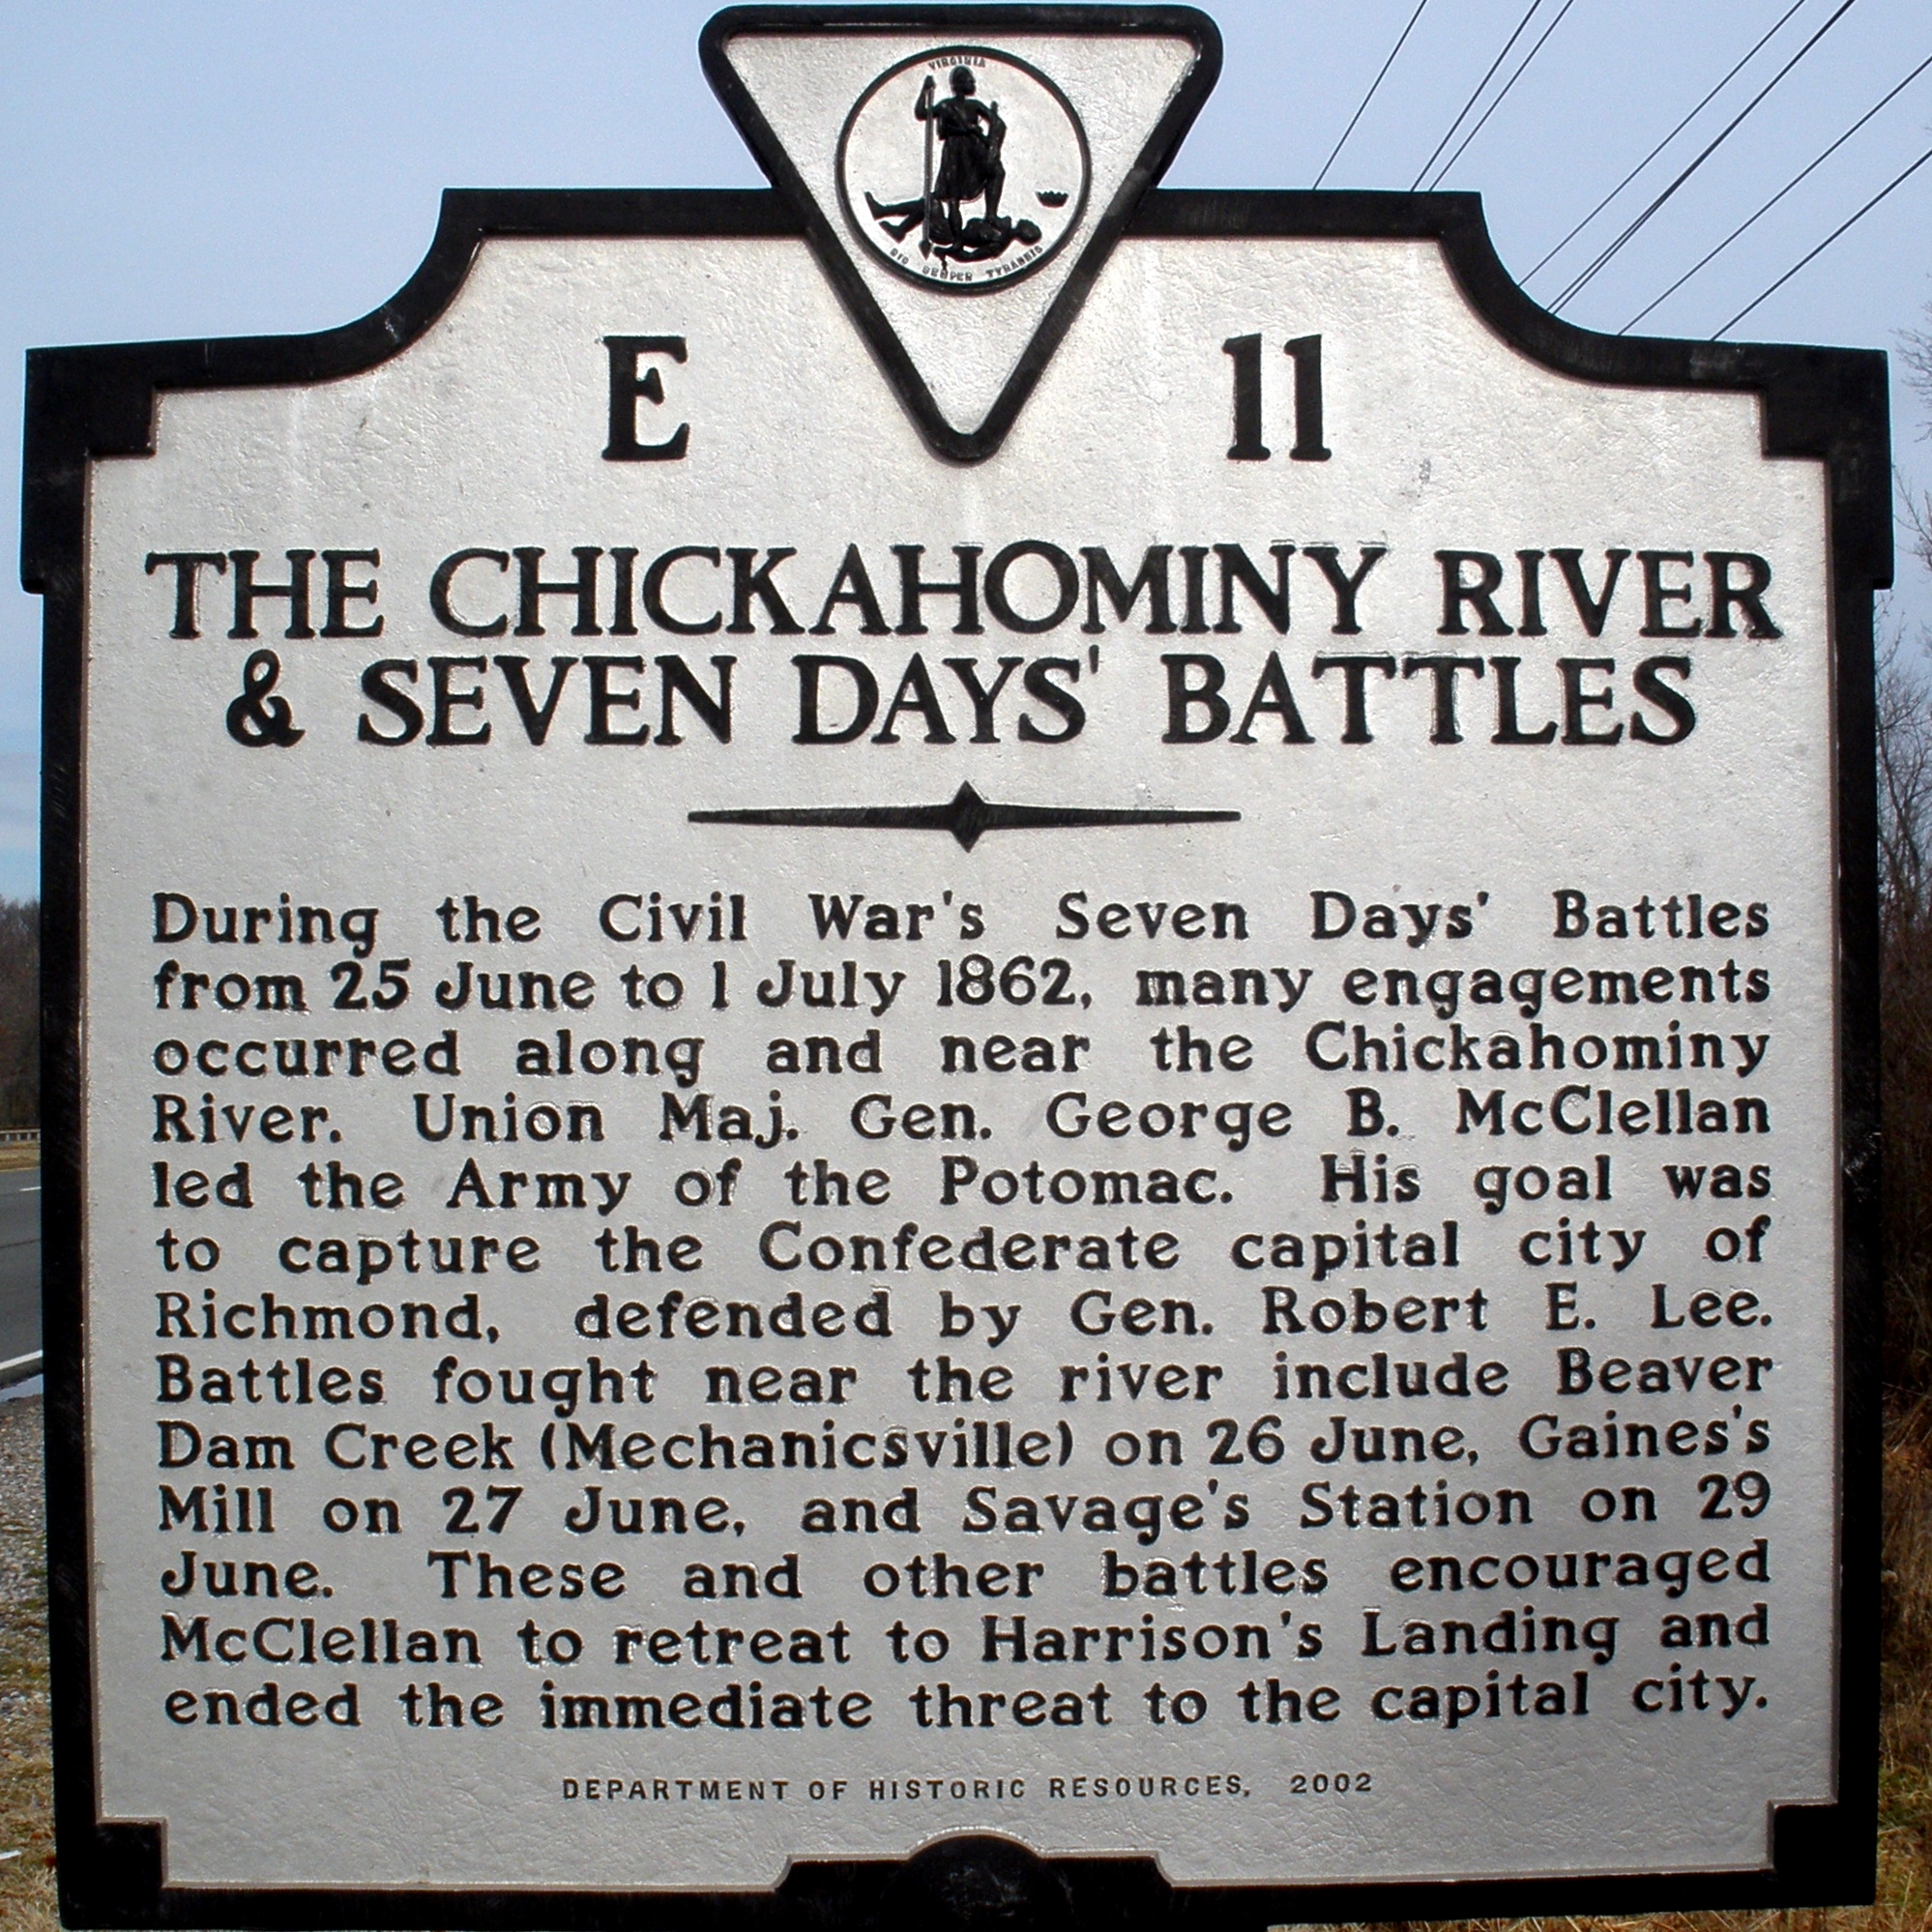 The Chickahominy River & Seven Days